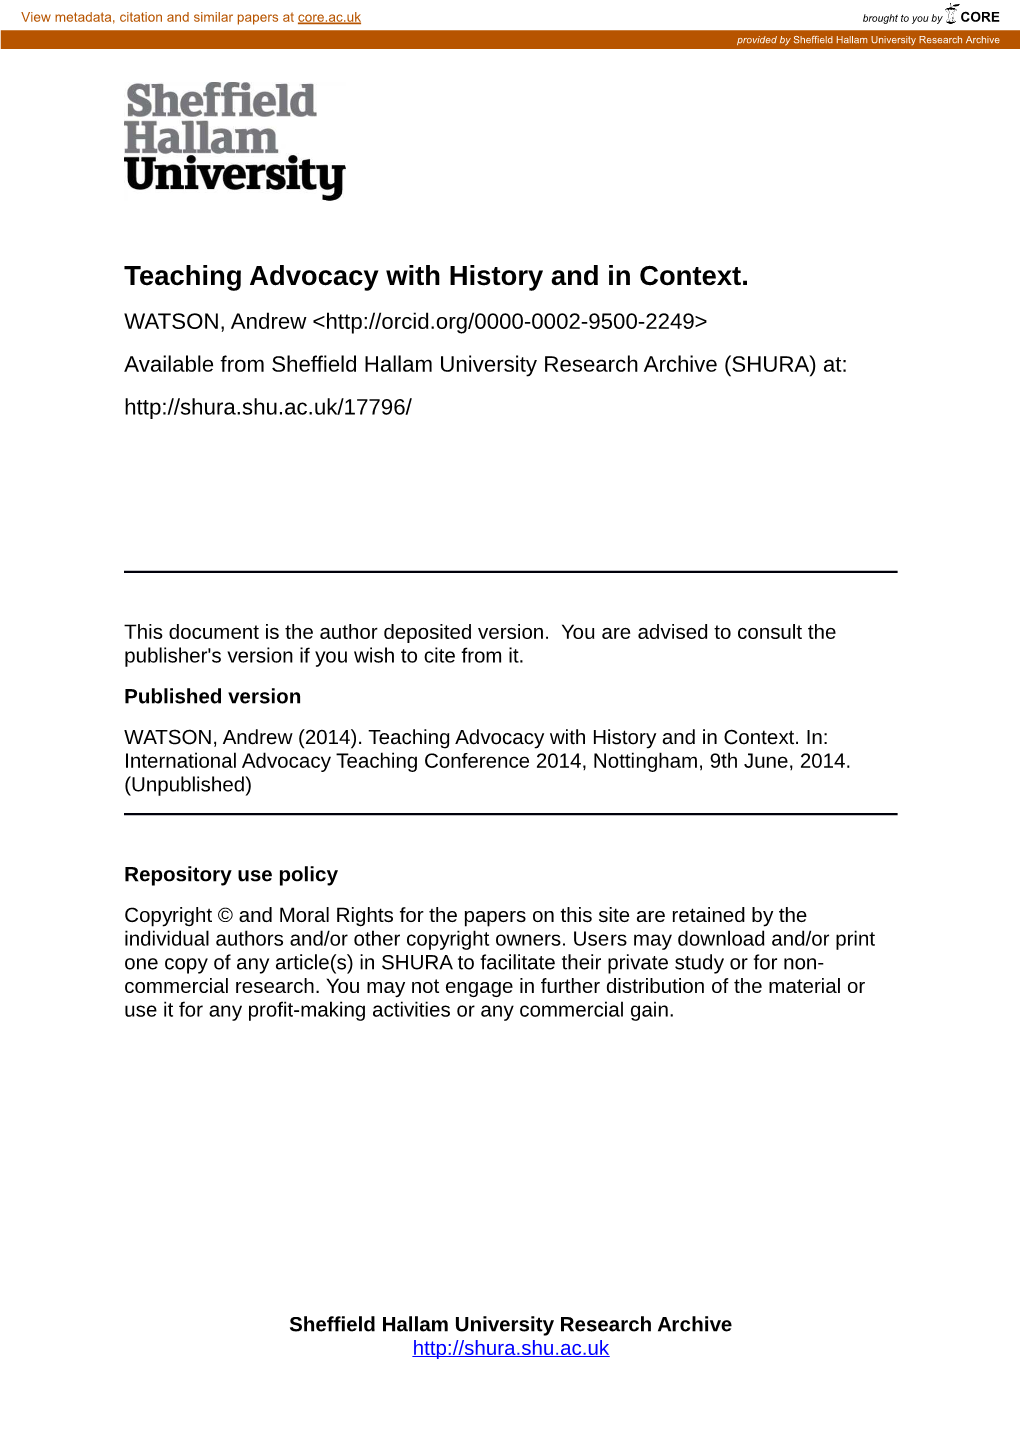 Teaching History of Advocacy with Skills